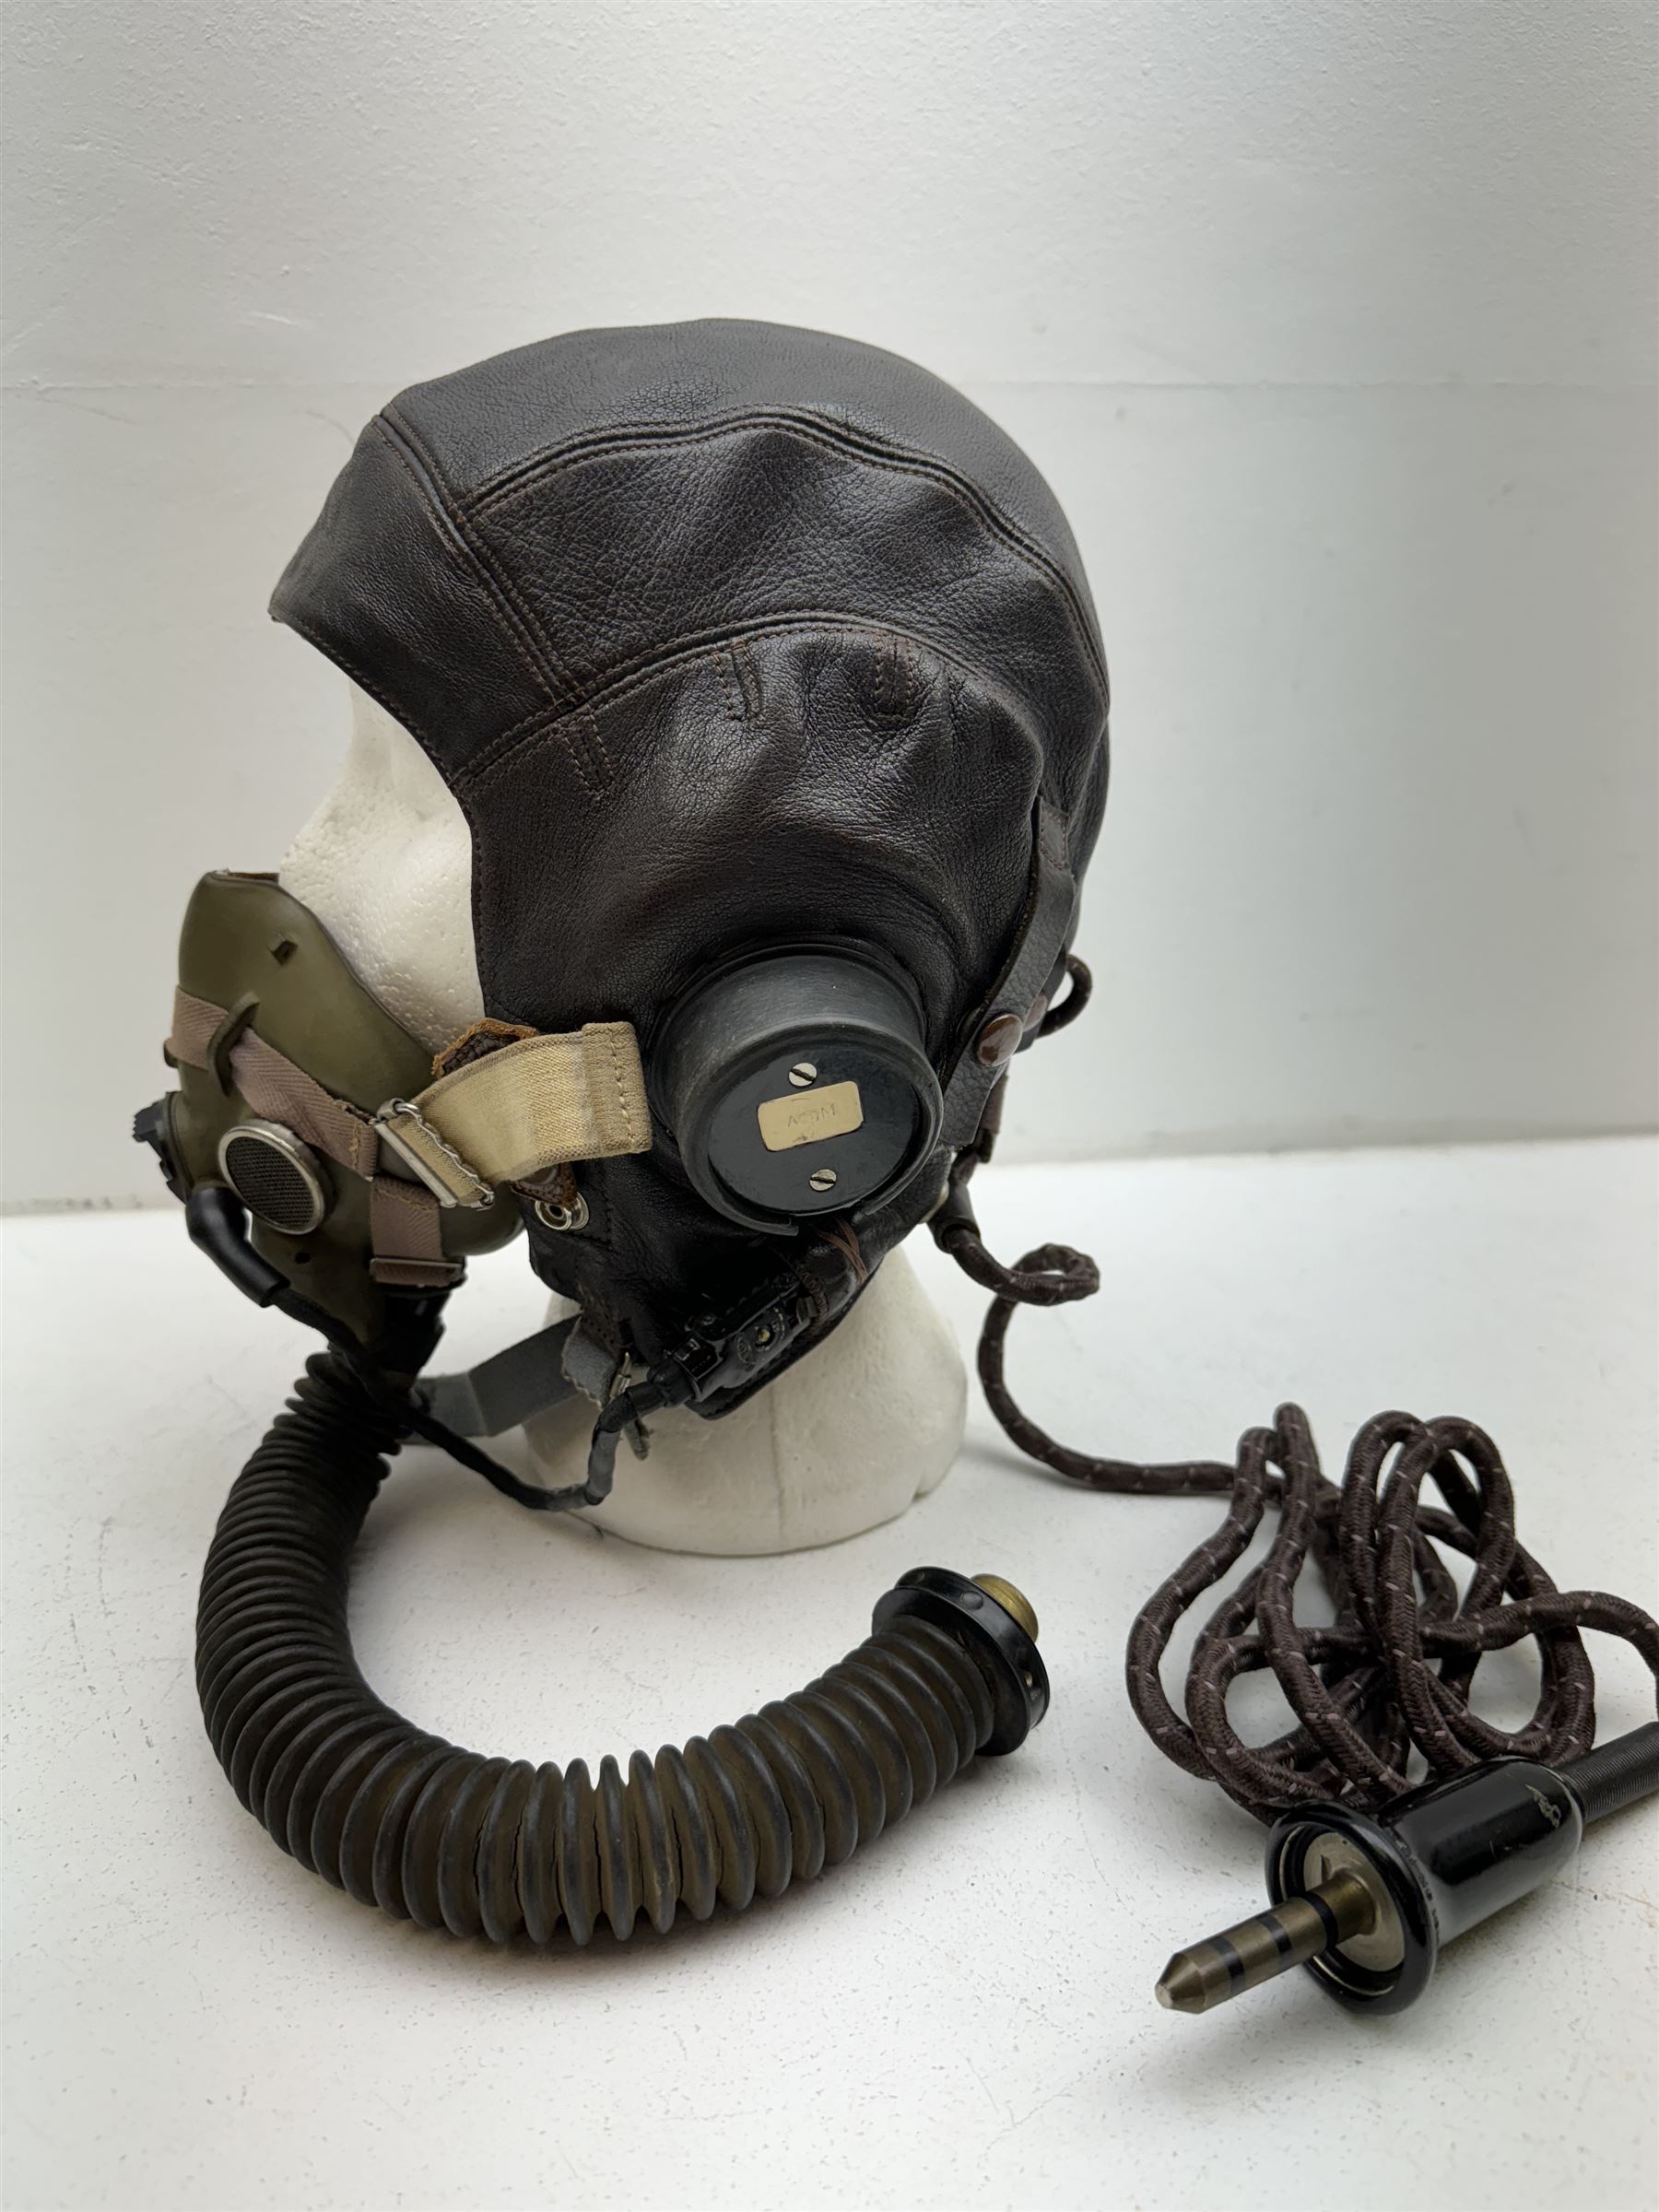 British RAF Flying Helmet complete with AM marked headphones and wiring loom with jack plug - Image 3 of 6